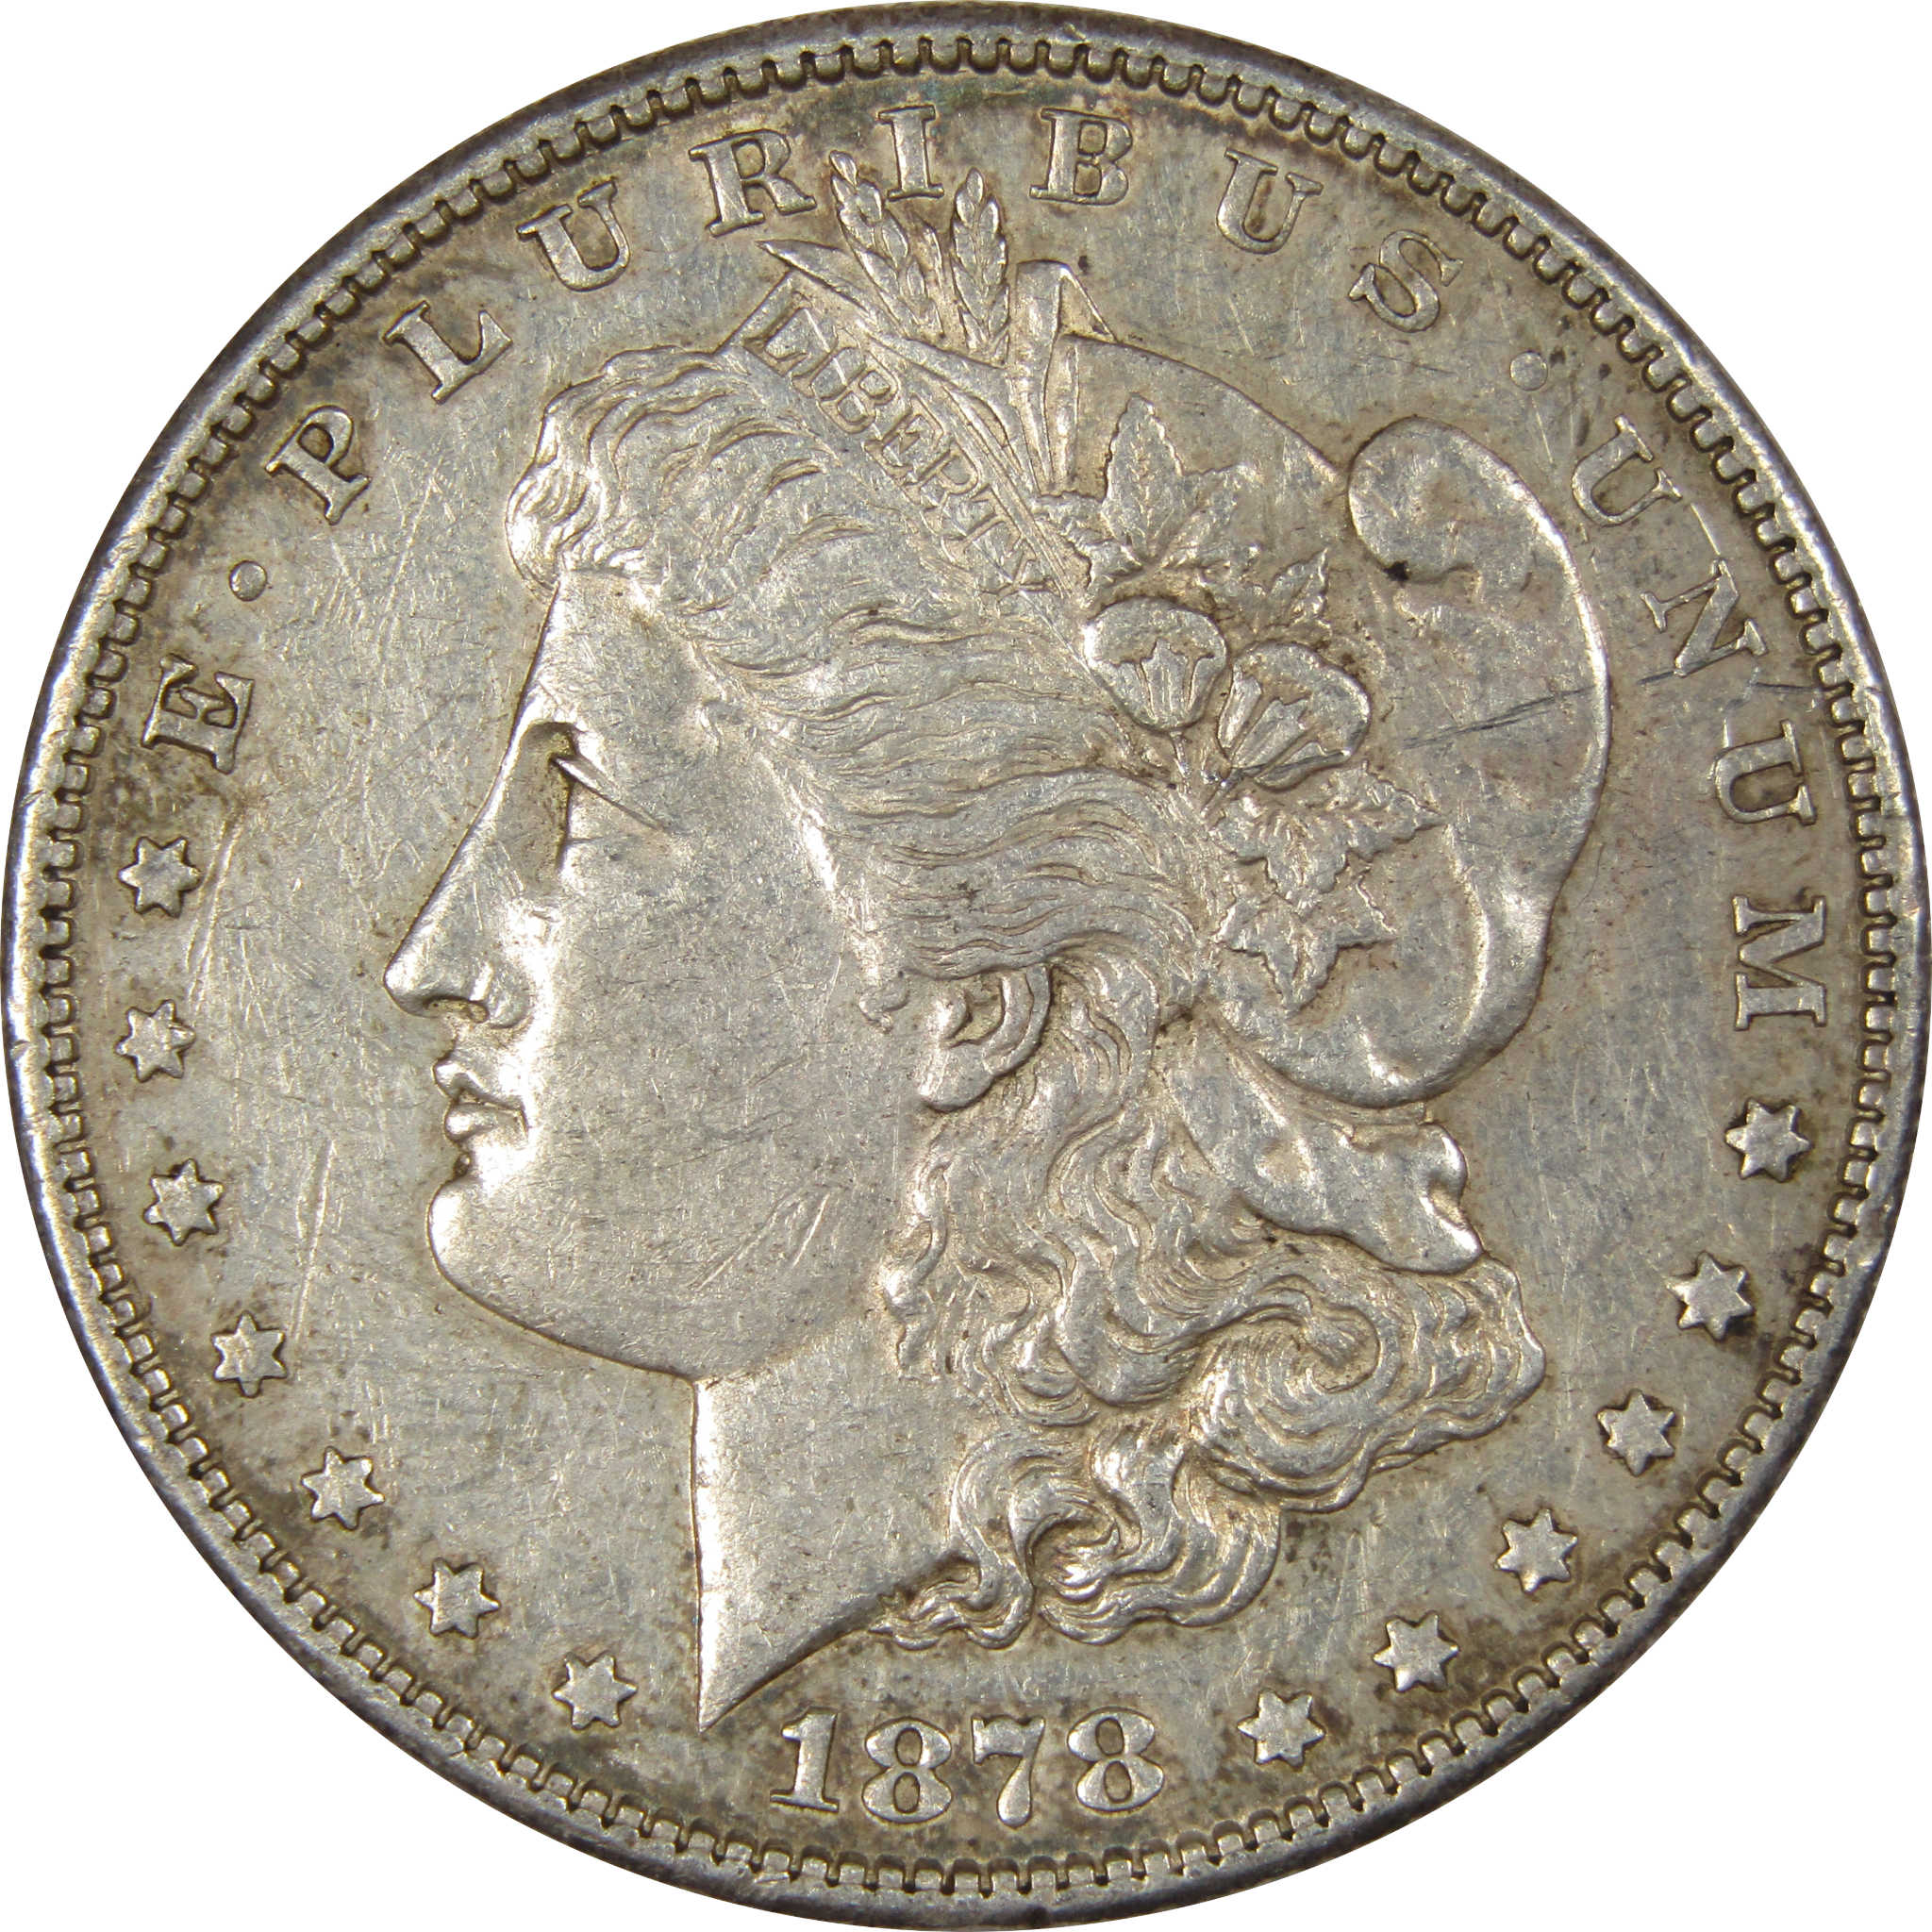 1878 S Morgan Dollar XF EF Extremely Fine 90% Silver SKU:IPC8295 - Morgan coin - Morgan silver dollar - Morgan silver dollar for sale - Profile Coins &amp; Collectibles